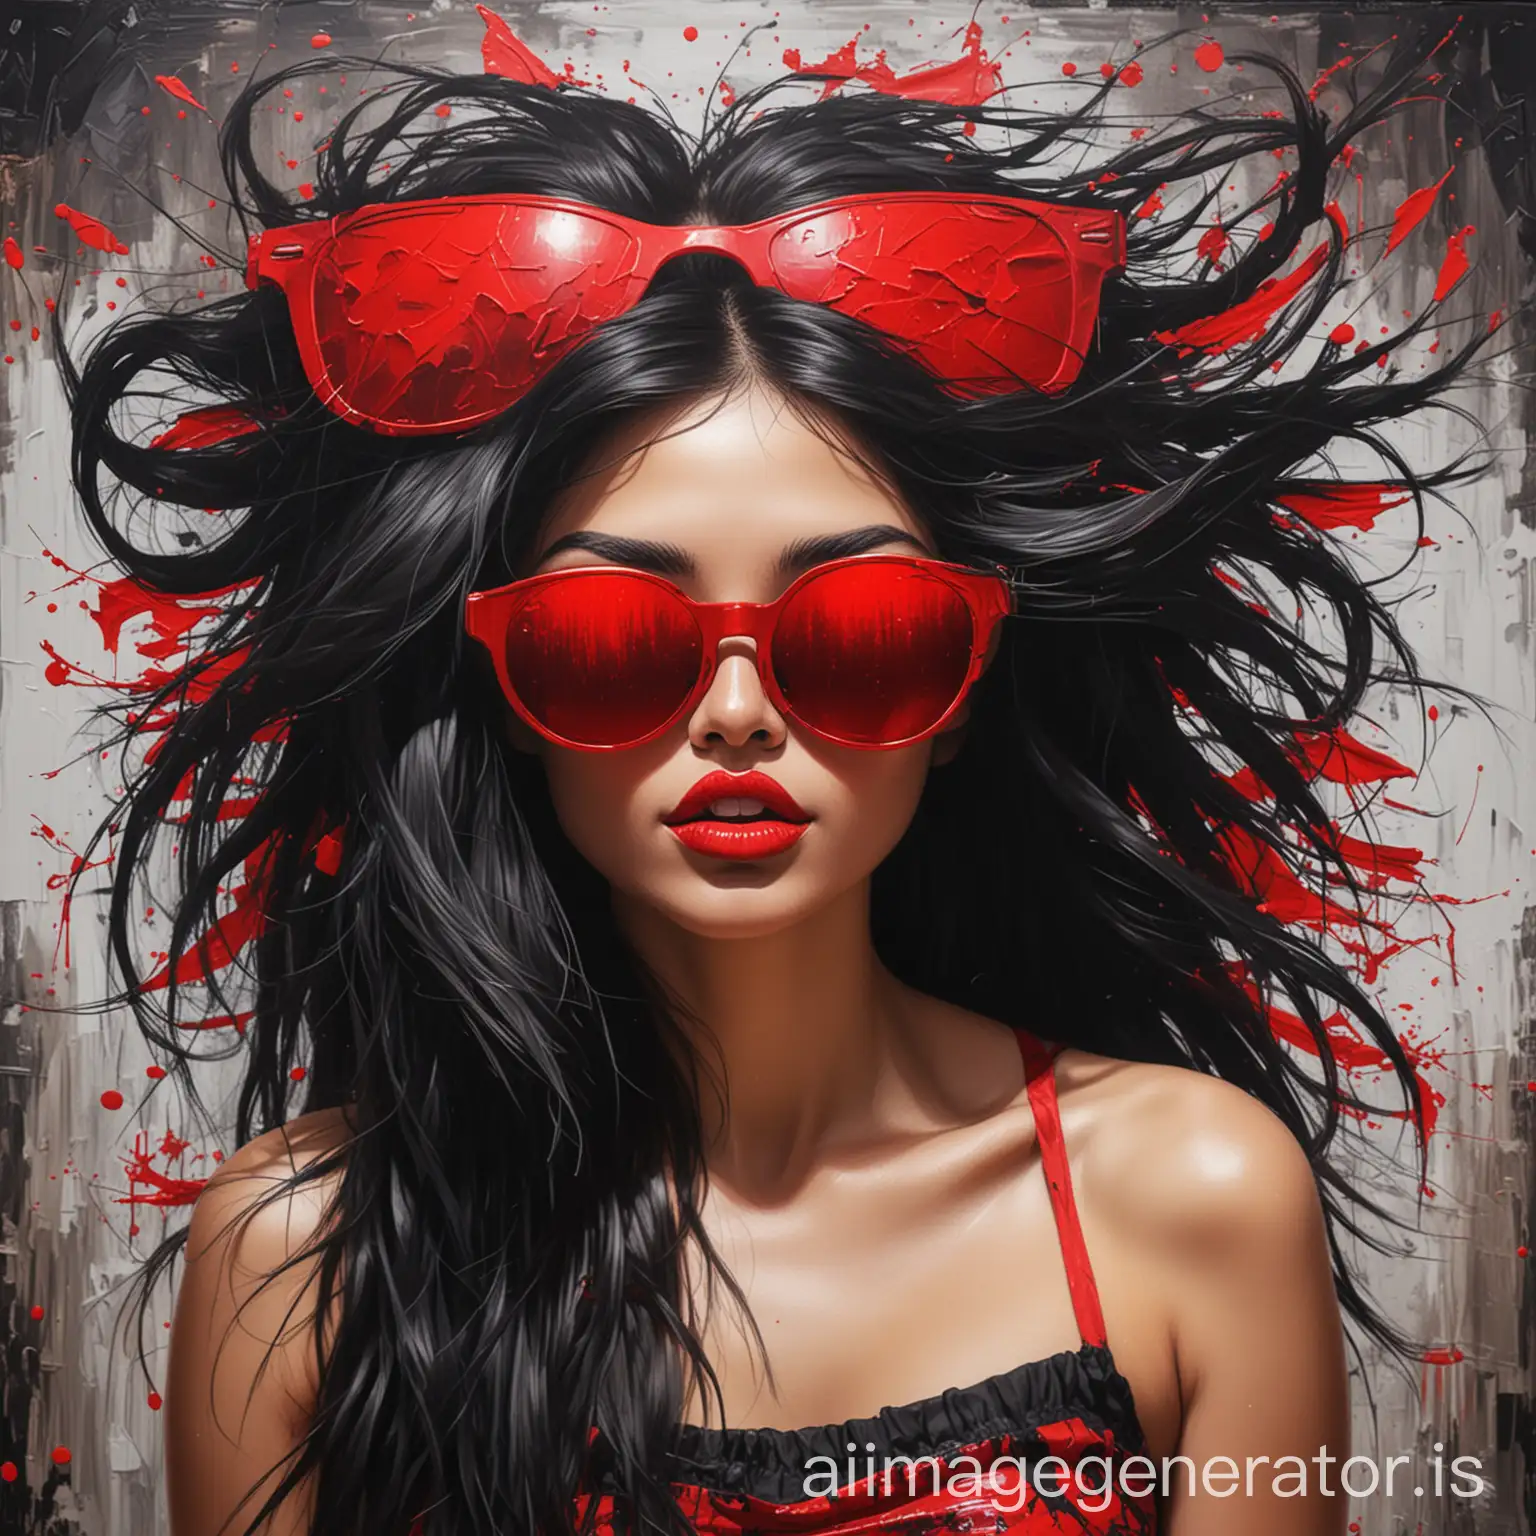 Abstract-Art-of-a-Girl-with-Black-Hair-Red-Sunglasses-Red-Bra-and-Black-Top